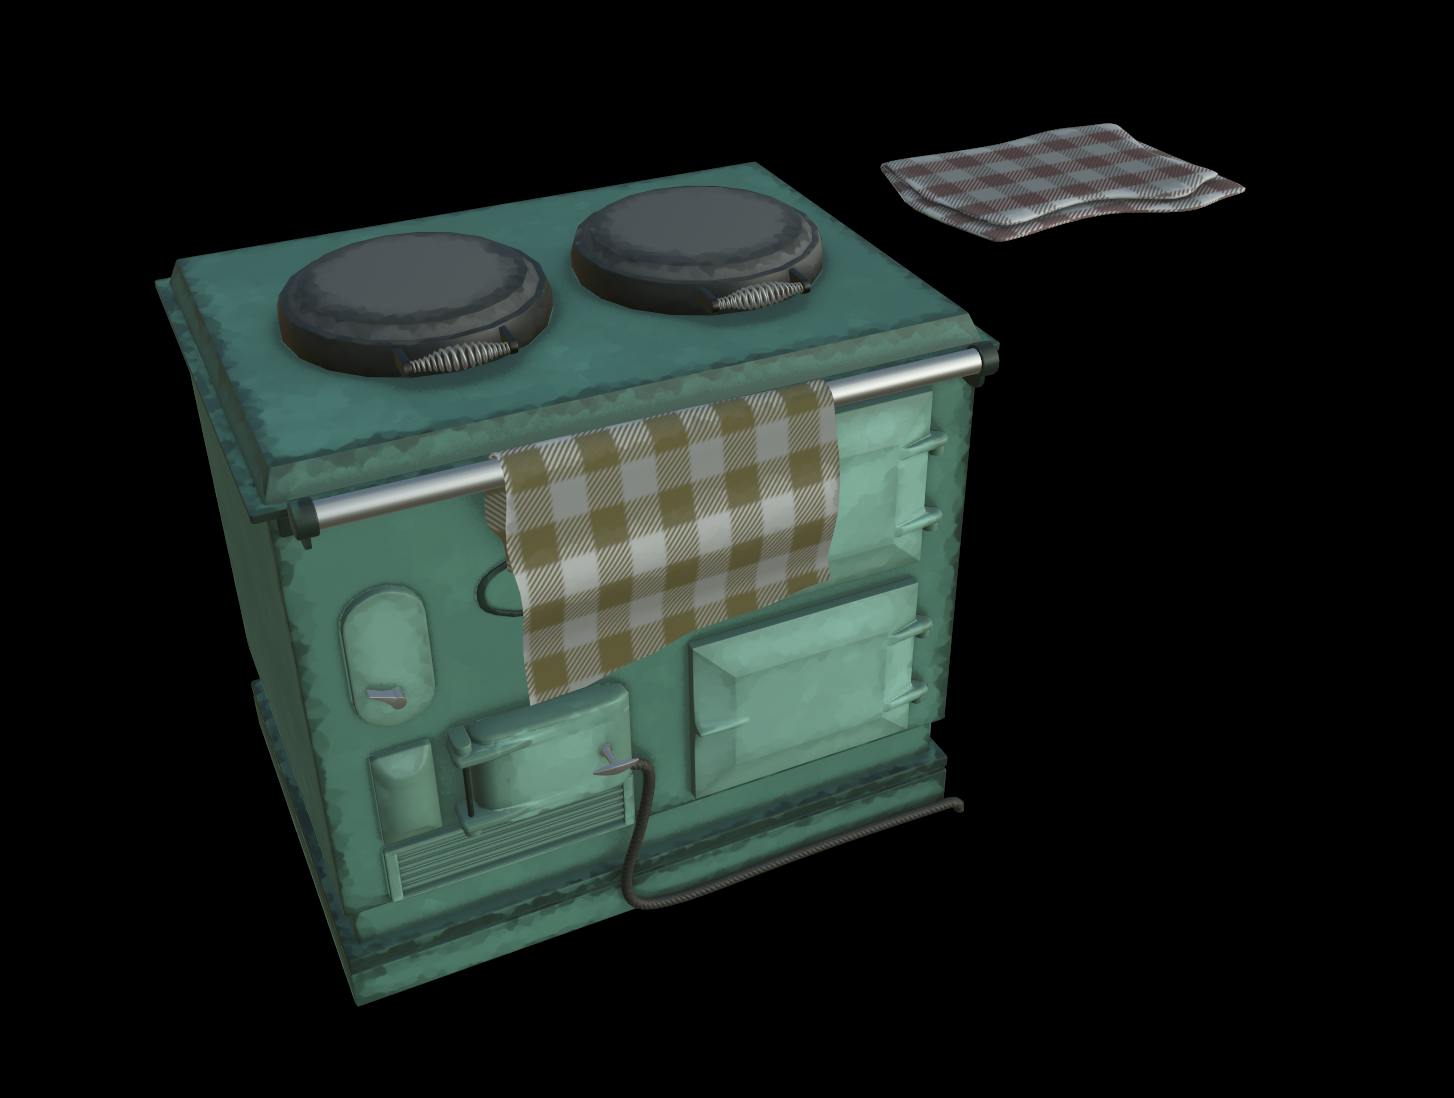 A 3D, textured model of an Aga. The age is pale green, with two hot plates on the top, and a beige and white checked tea-towel hanging over a rail at the front.